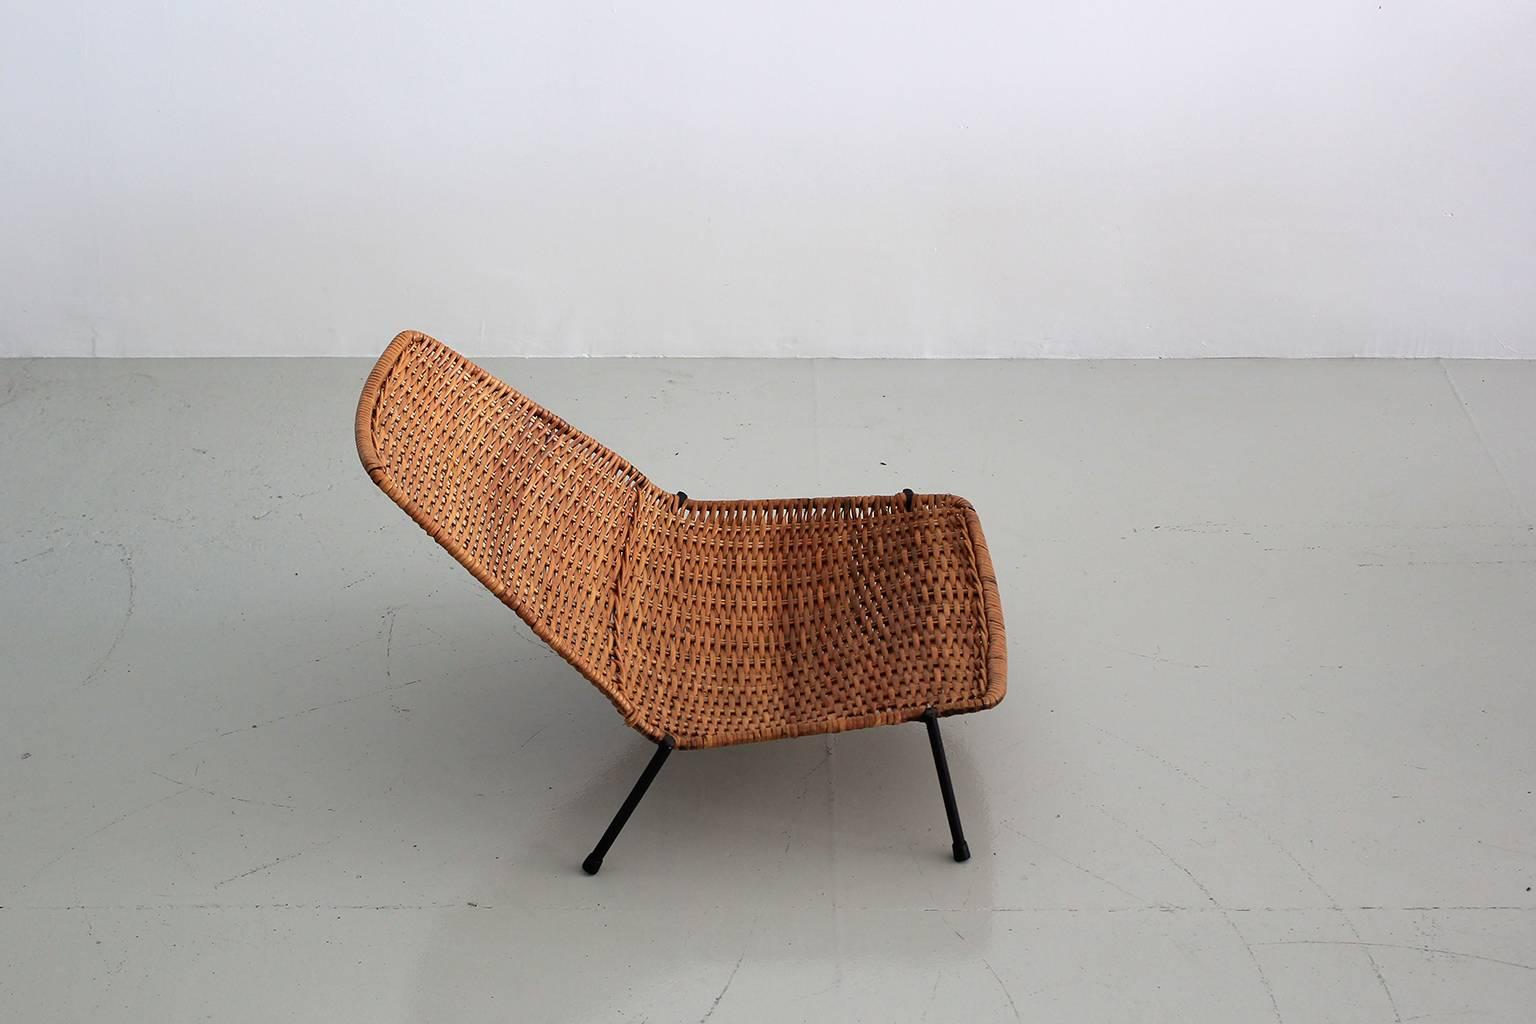 American Woven Wicker Pool Chairs 